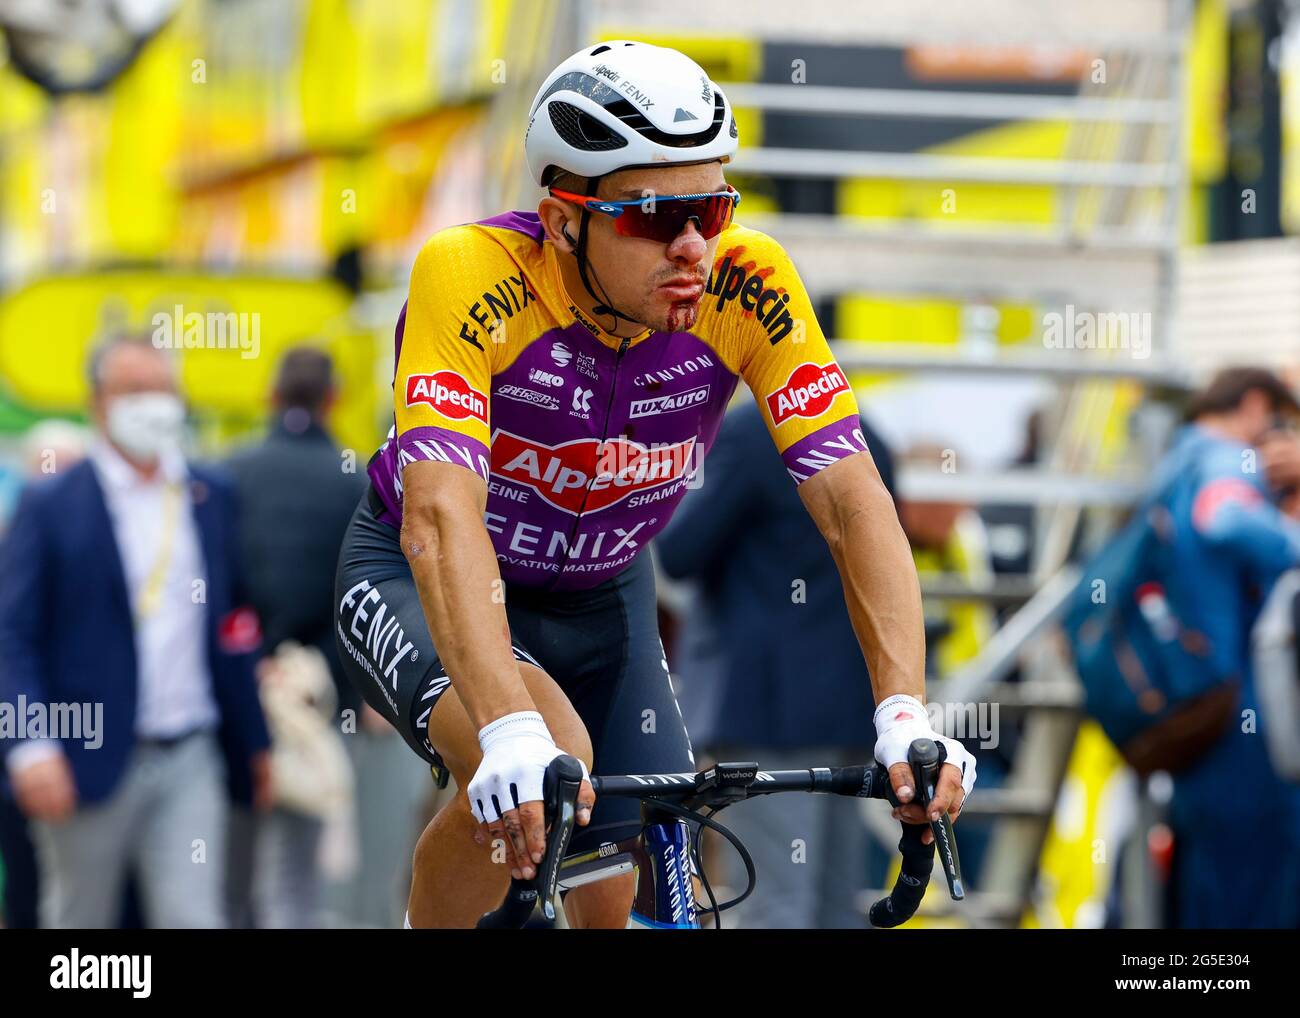 BREST to LANDERNEAU, France, 26th June 2021, g winning A rider from Alpecin Fenix covered in blood after crashing during stage 1 of the 2021 tour de france , Credit:Pool/Jan De Meuleneir/Goding images/Alamy Live News Stock Photo